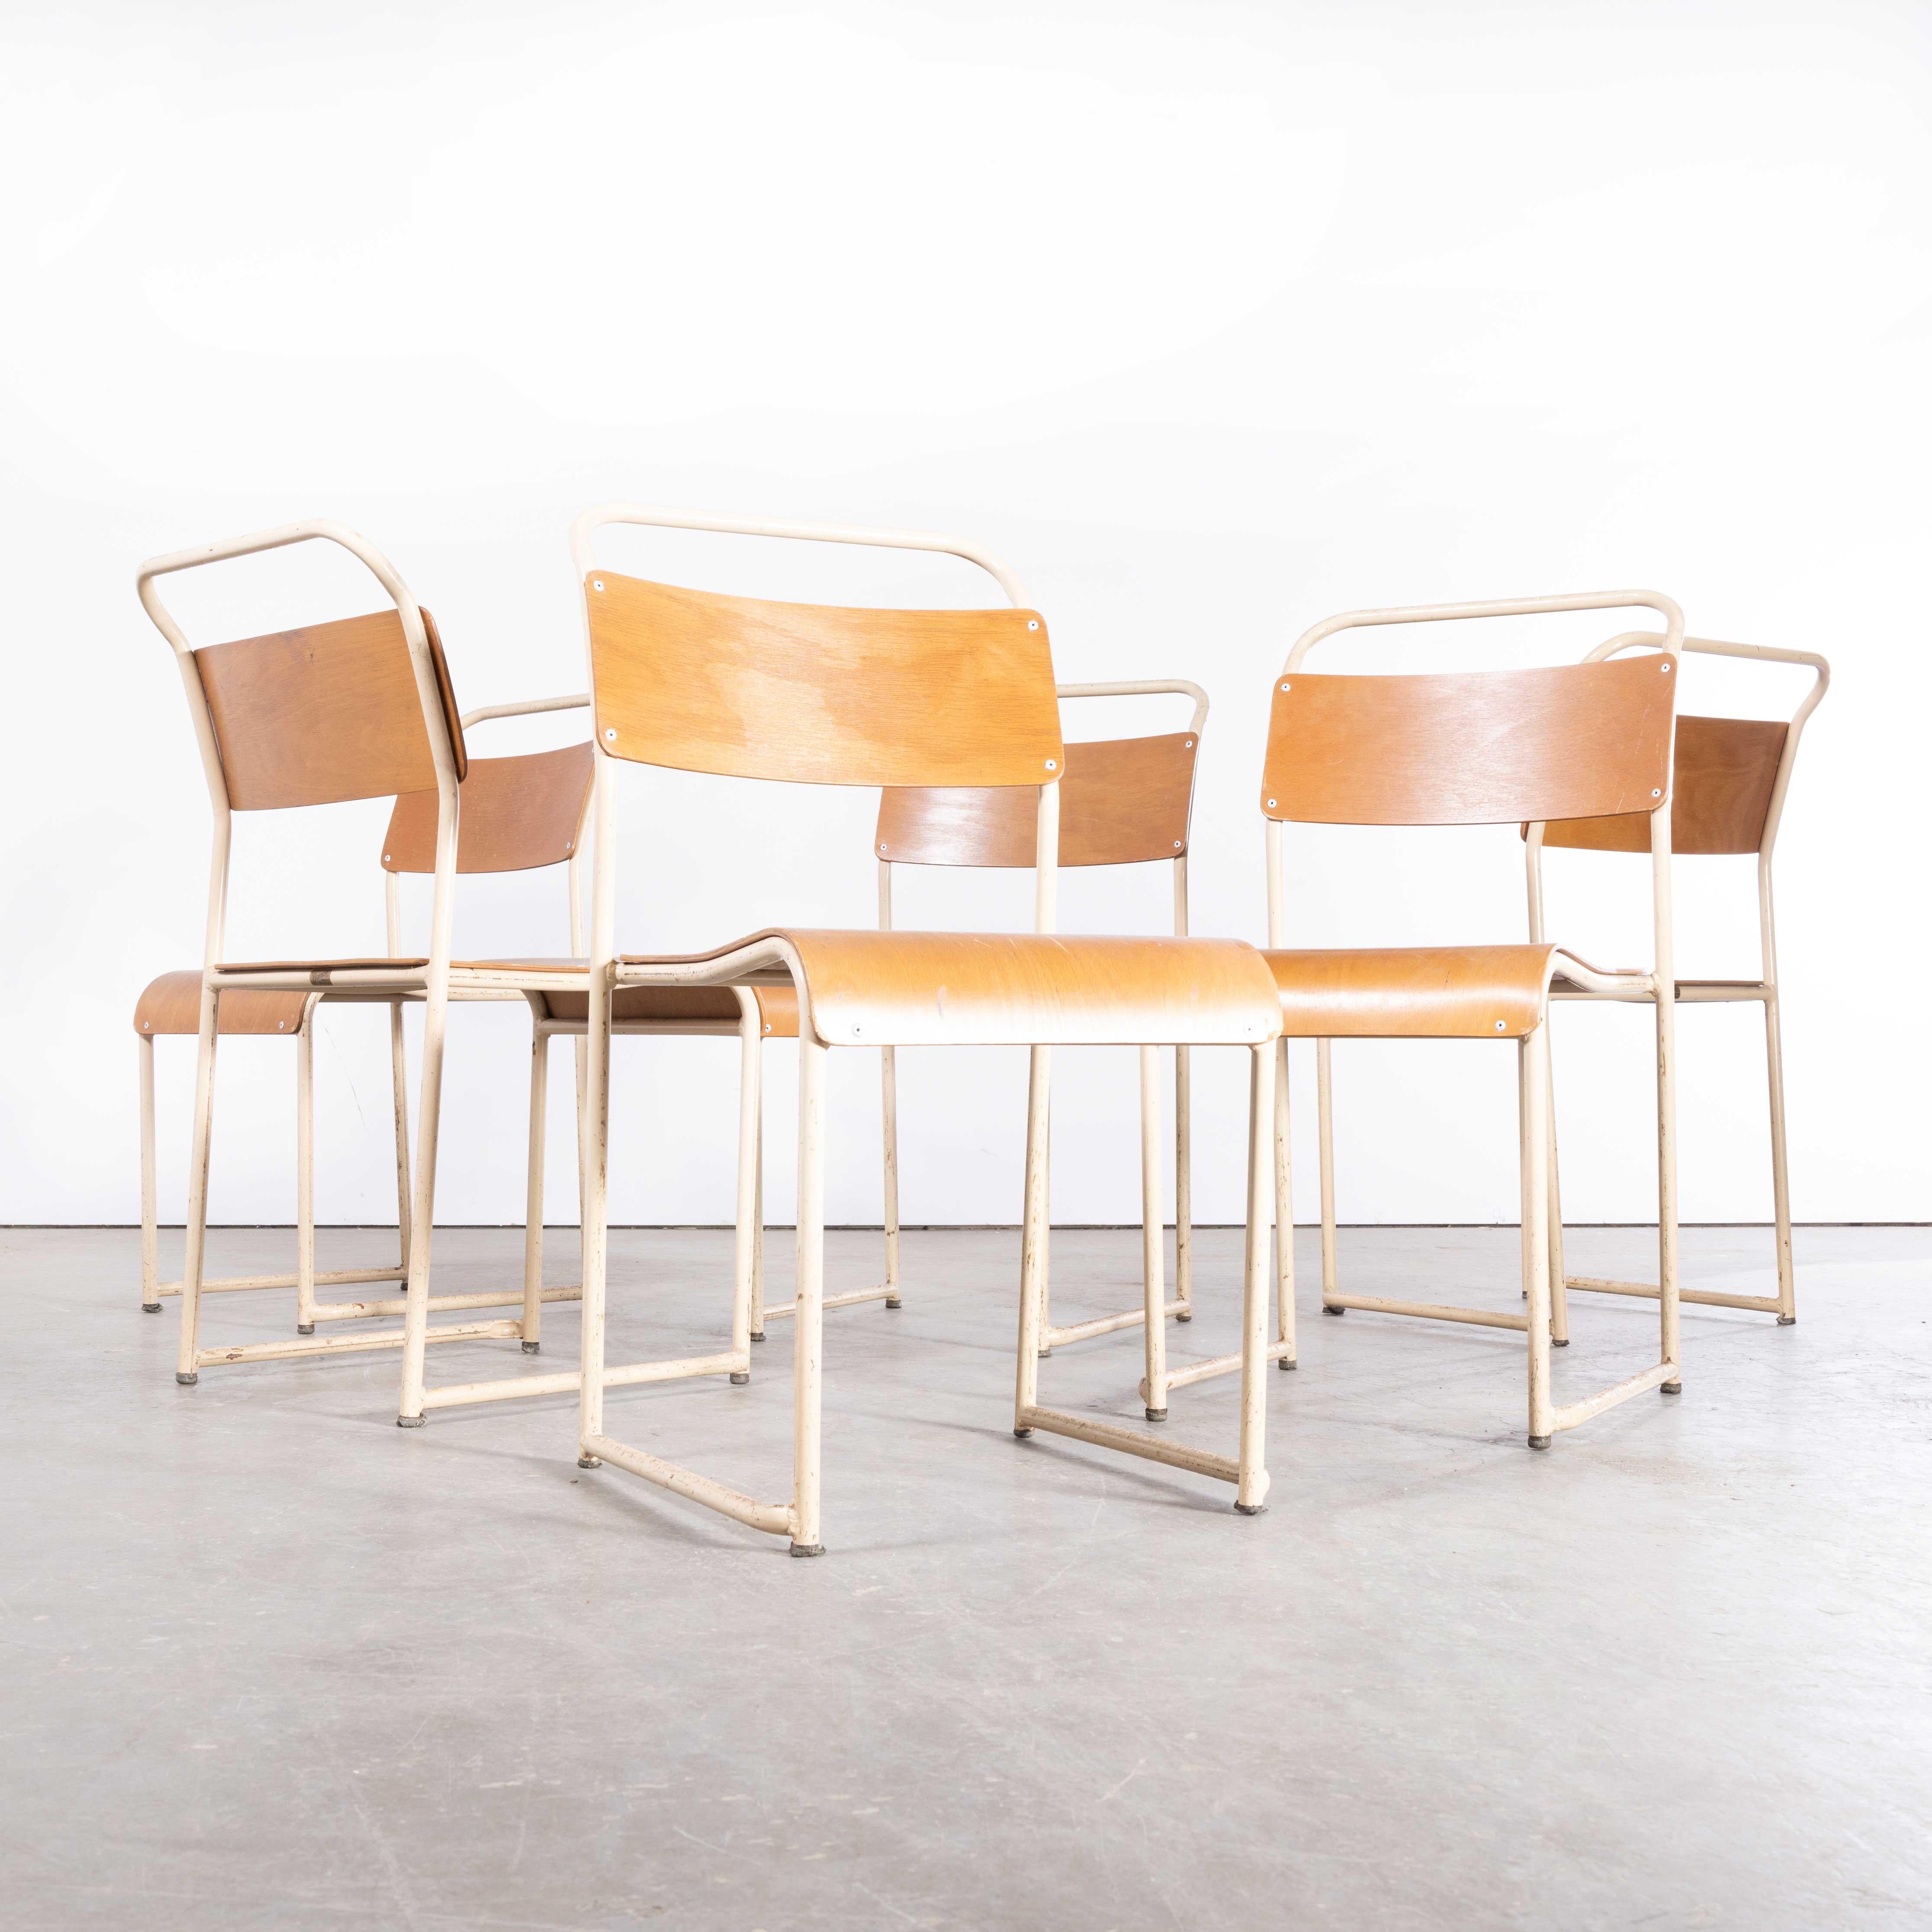 1950s Bamco Tubular Metal Cream Dining Chairs – Set Of Six
1950s Bamco Tubular Metal Cream Dining Chairs – Set Of Six. One of the all time Classic British chairs inspired by the contemporary designs of Bauhaus. The most famous producer in England